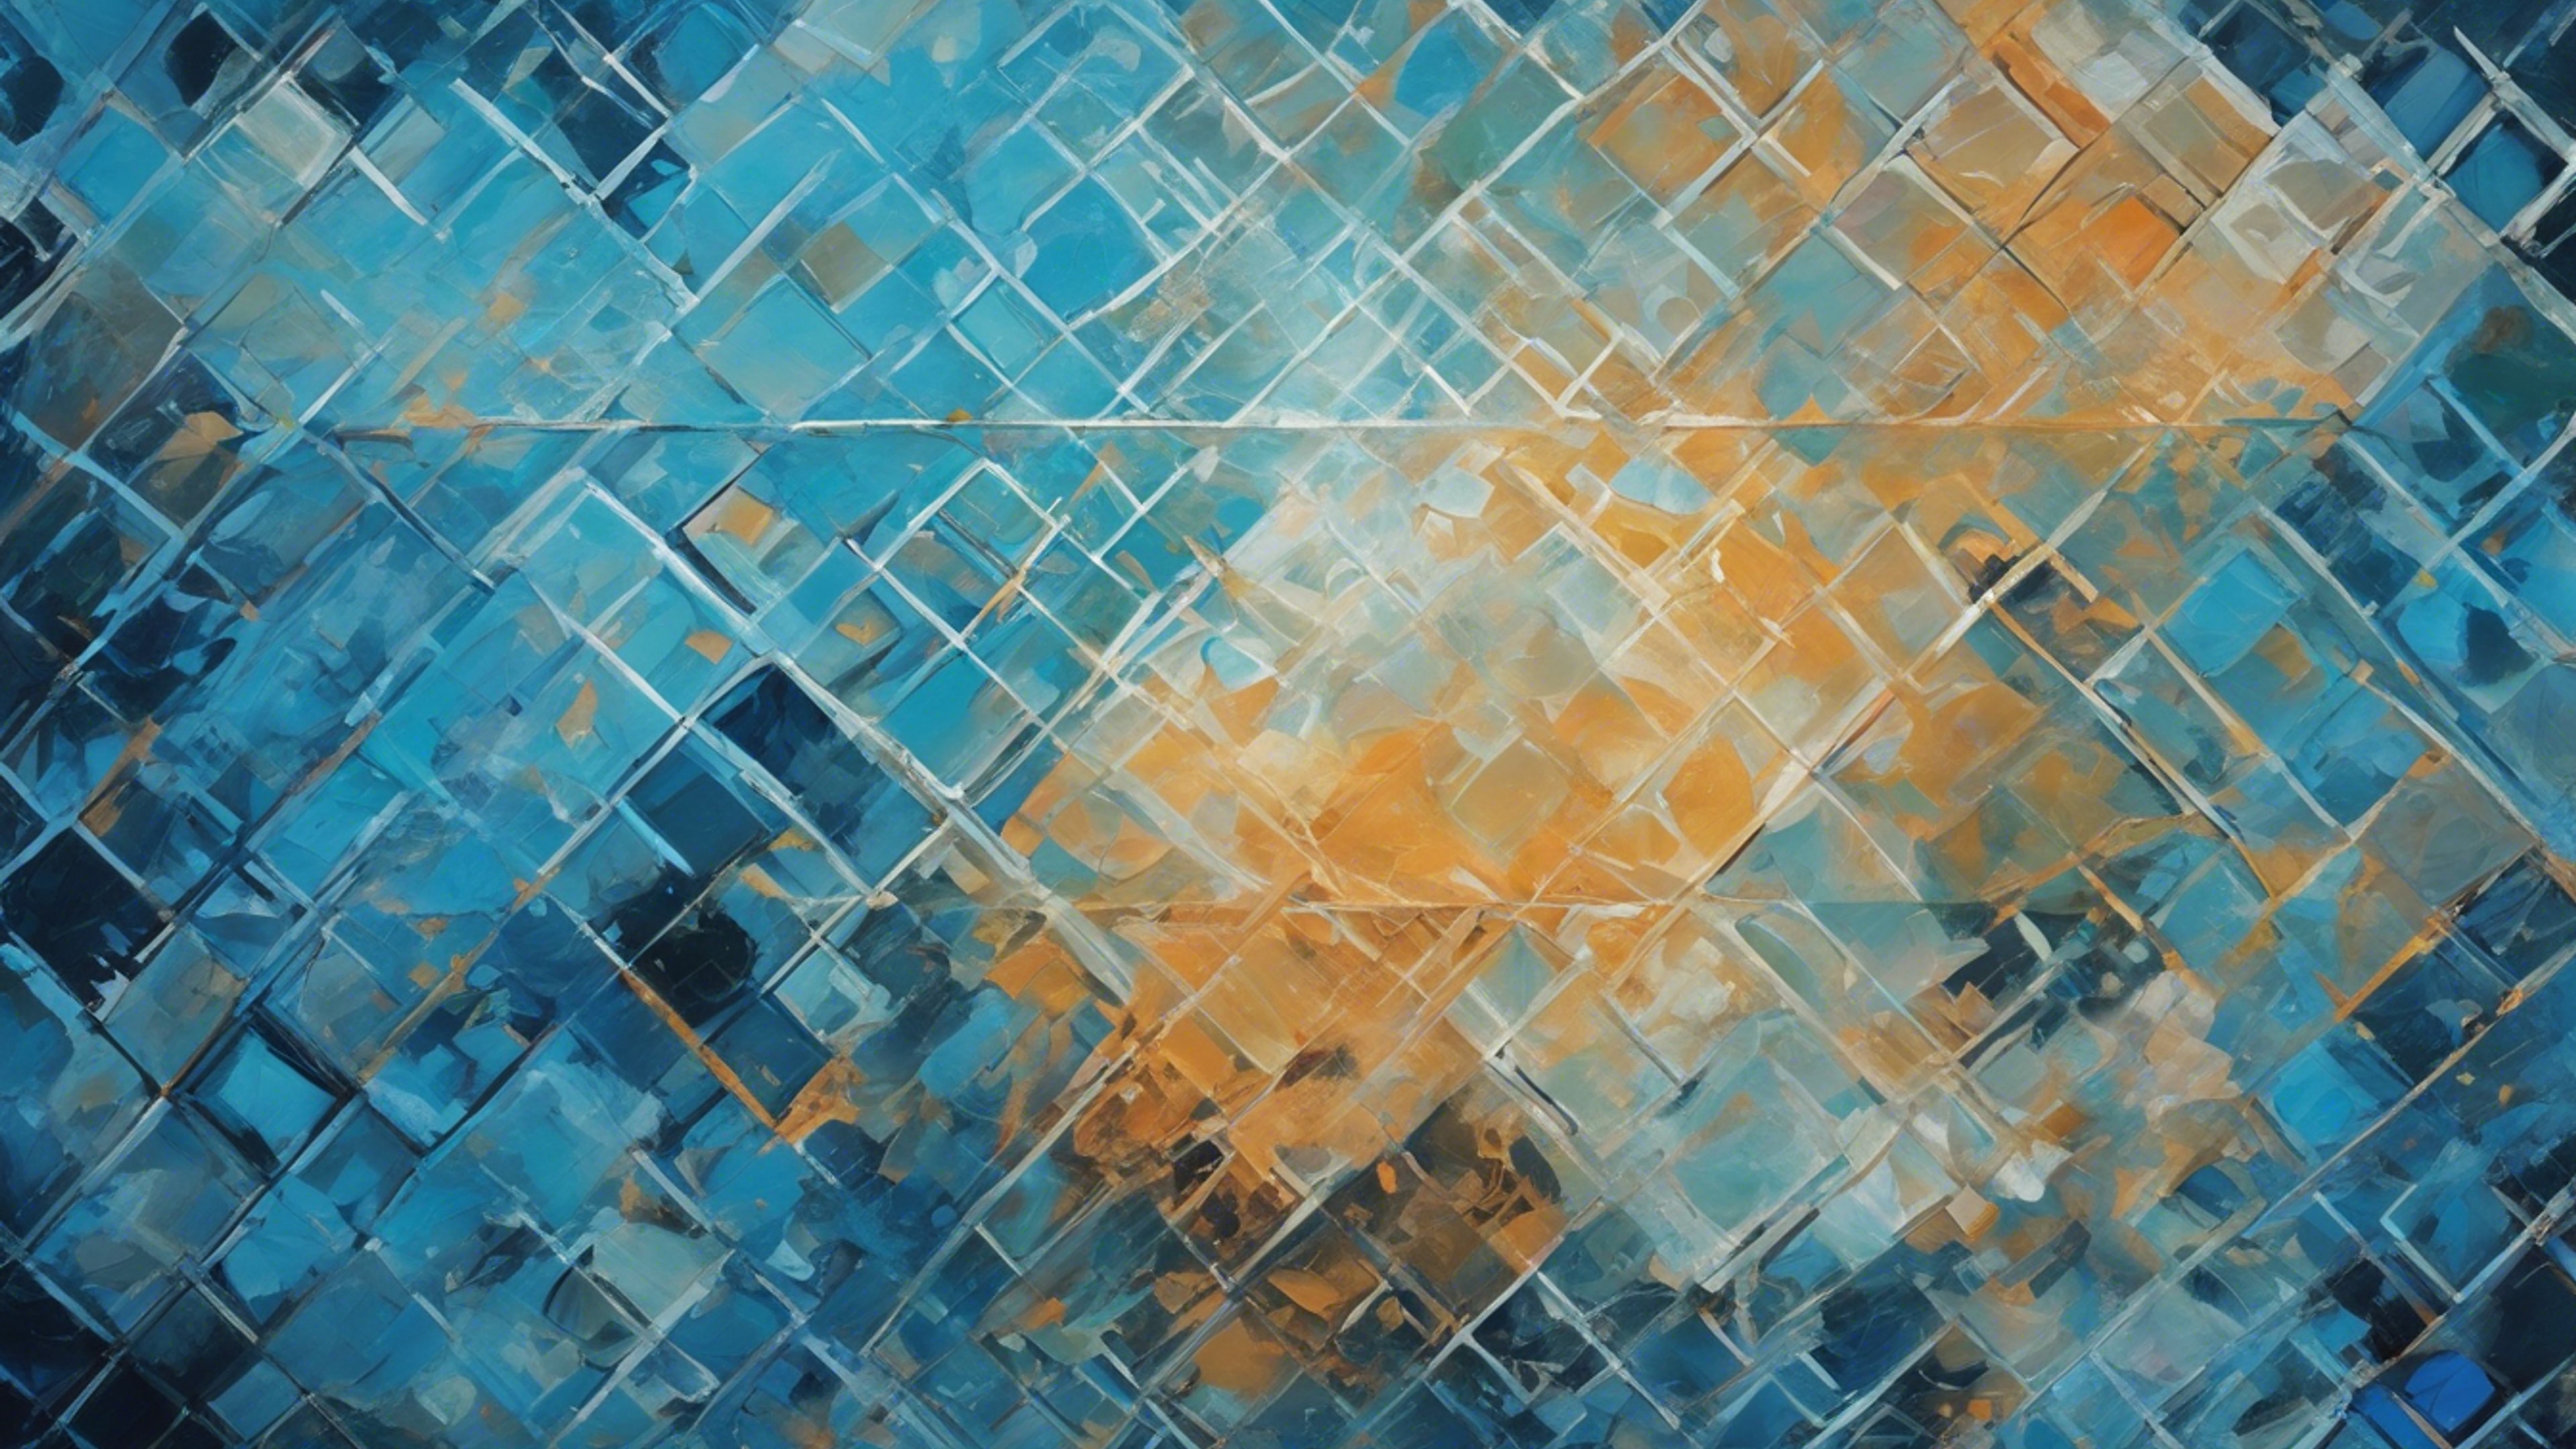 A cool blue geometric abstract painting Валлпапер[ac7eea7ca87f45839e46]